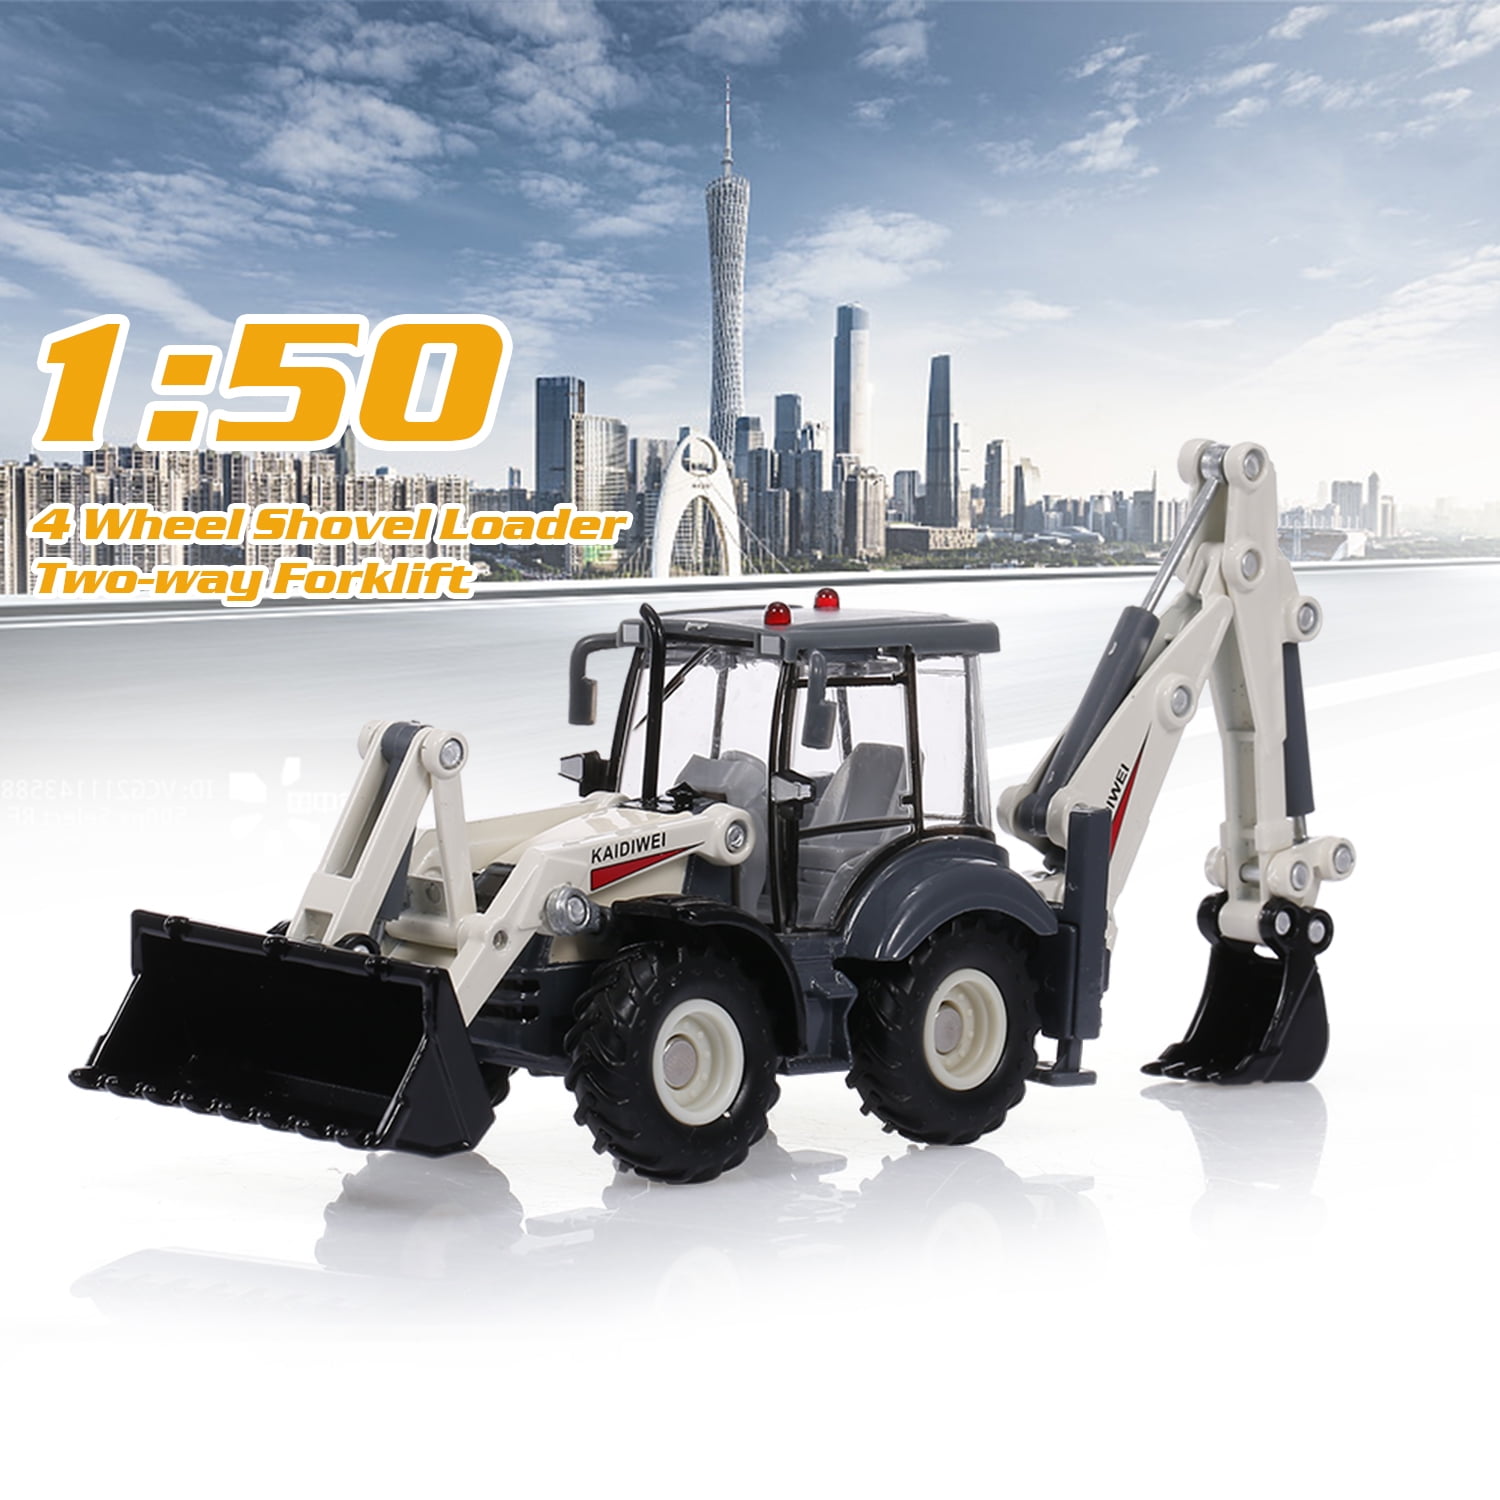 Alloy 1:50 Scale Diecast Two-Way Forklift Truck Construction Cars Model Toys US 